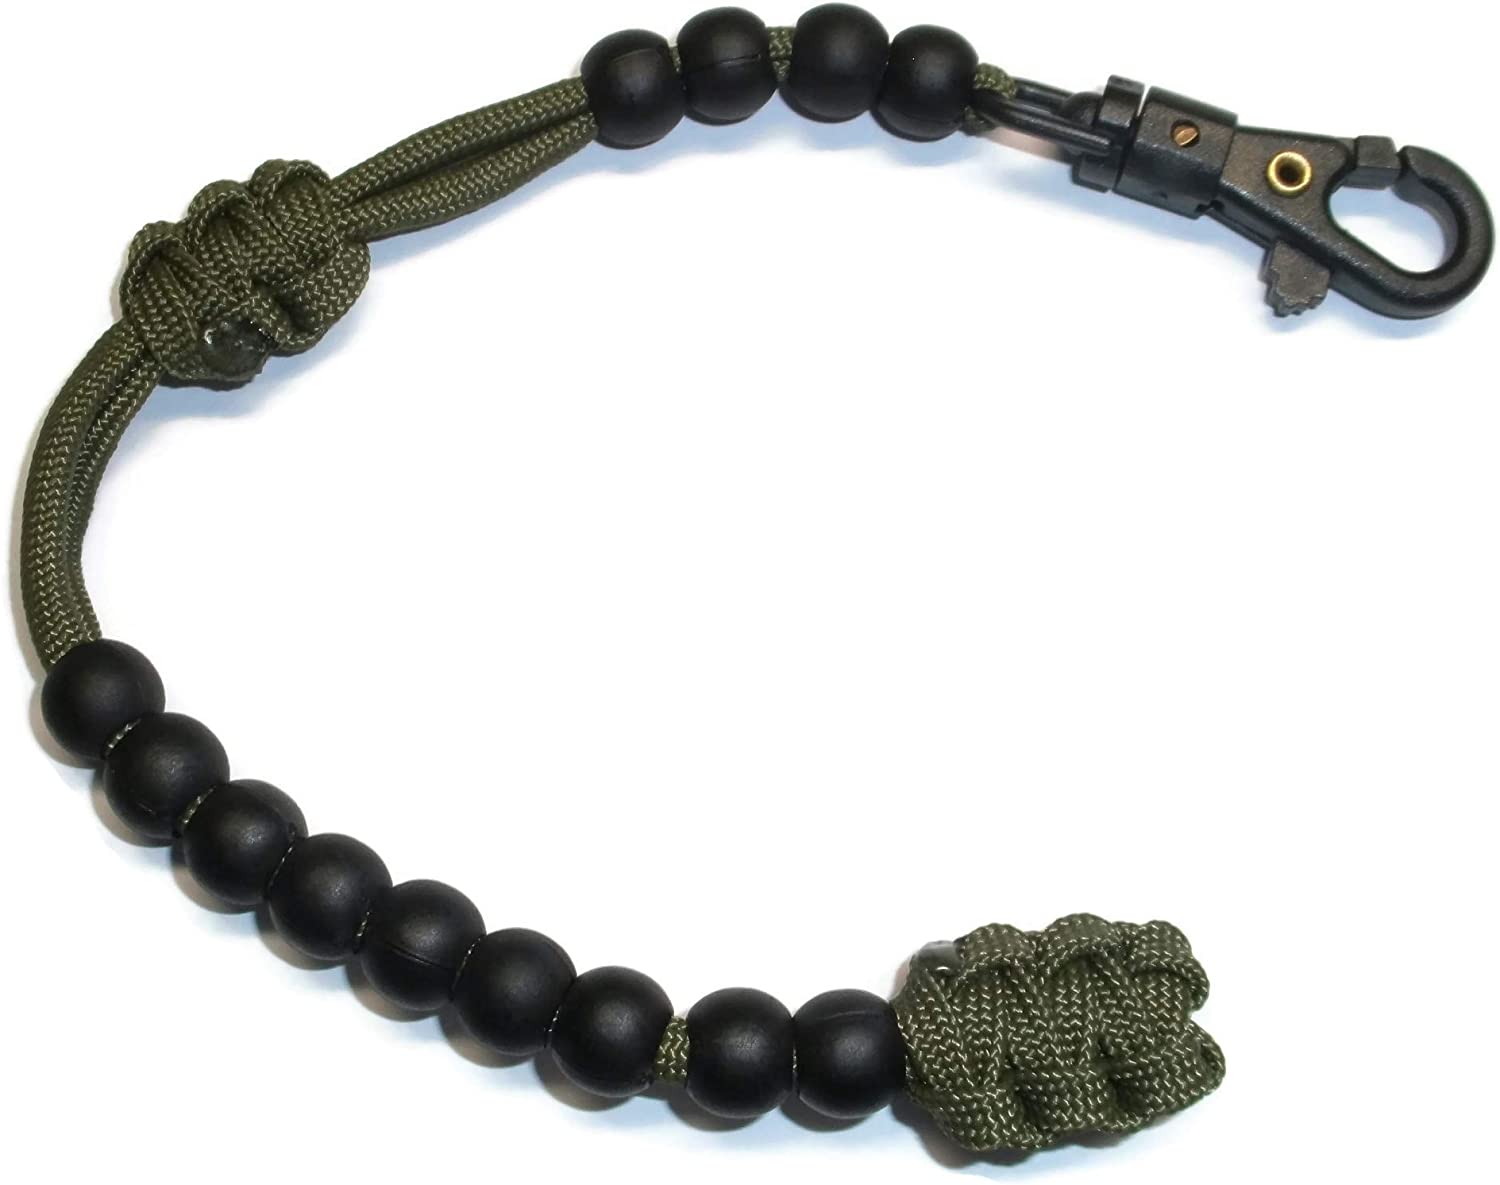 RedVex Ranger Pace Counter Beads - 10 inches - Choose Your Color (OD Green)  